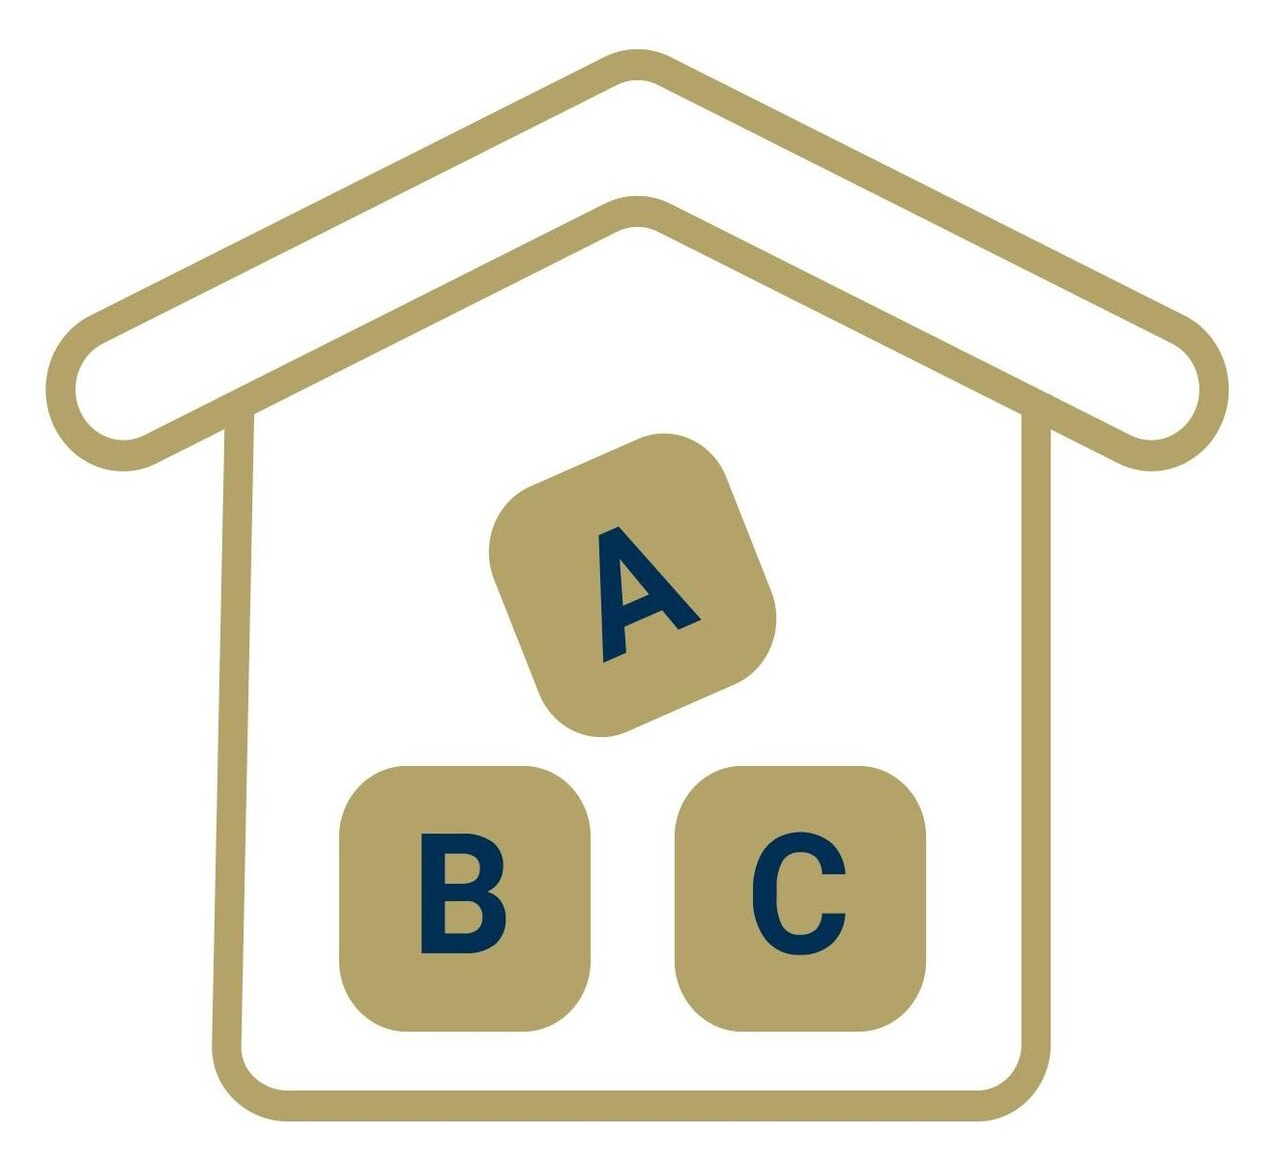 Illustration of a House with ABC blocks inside.